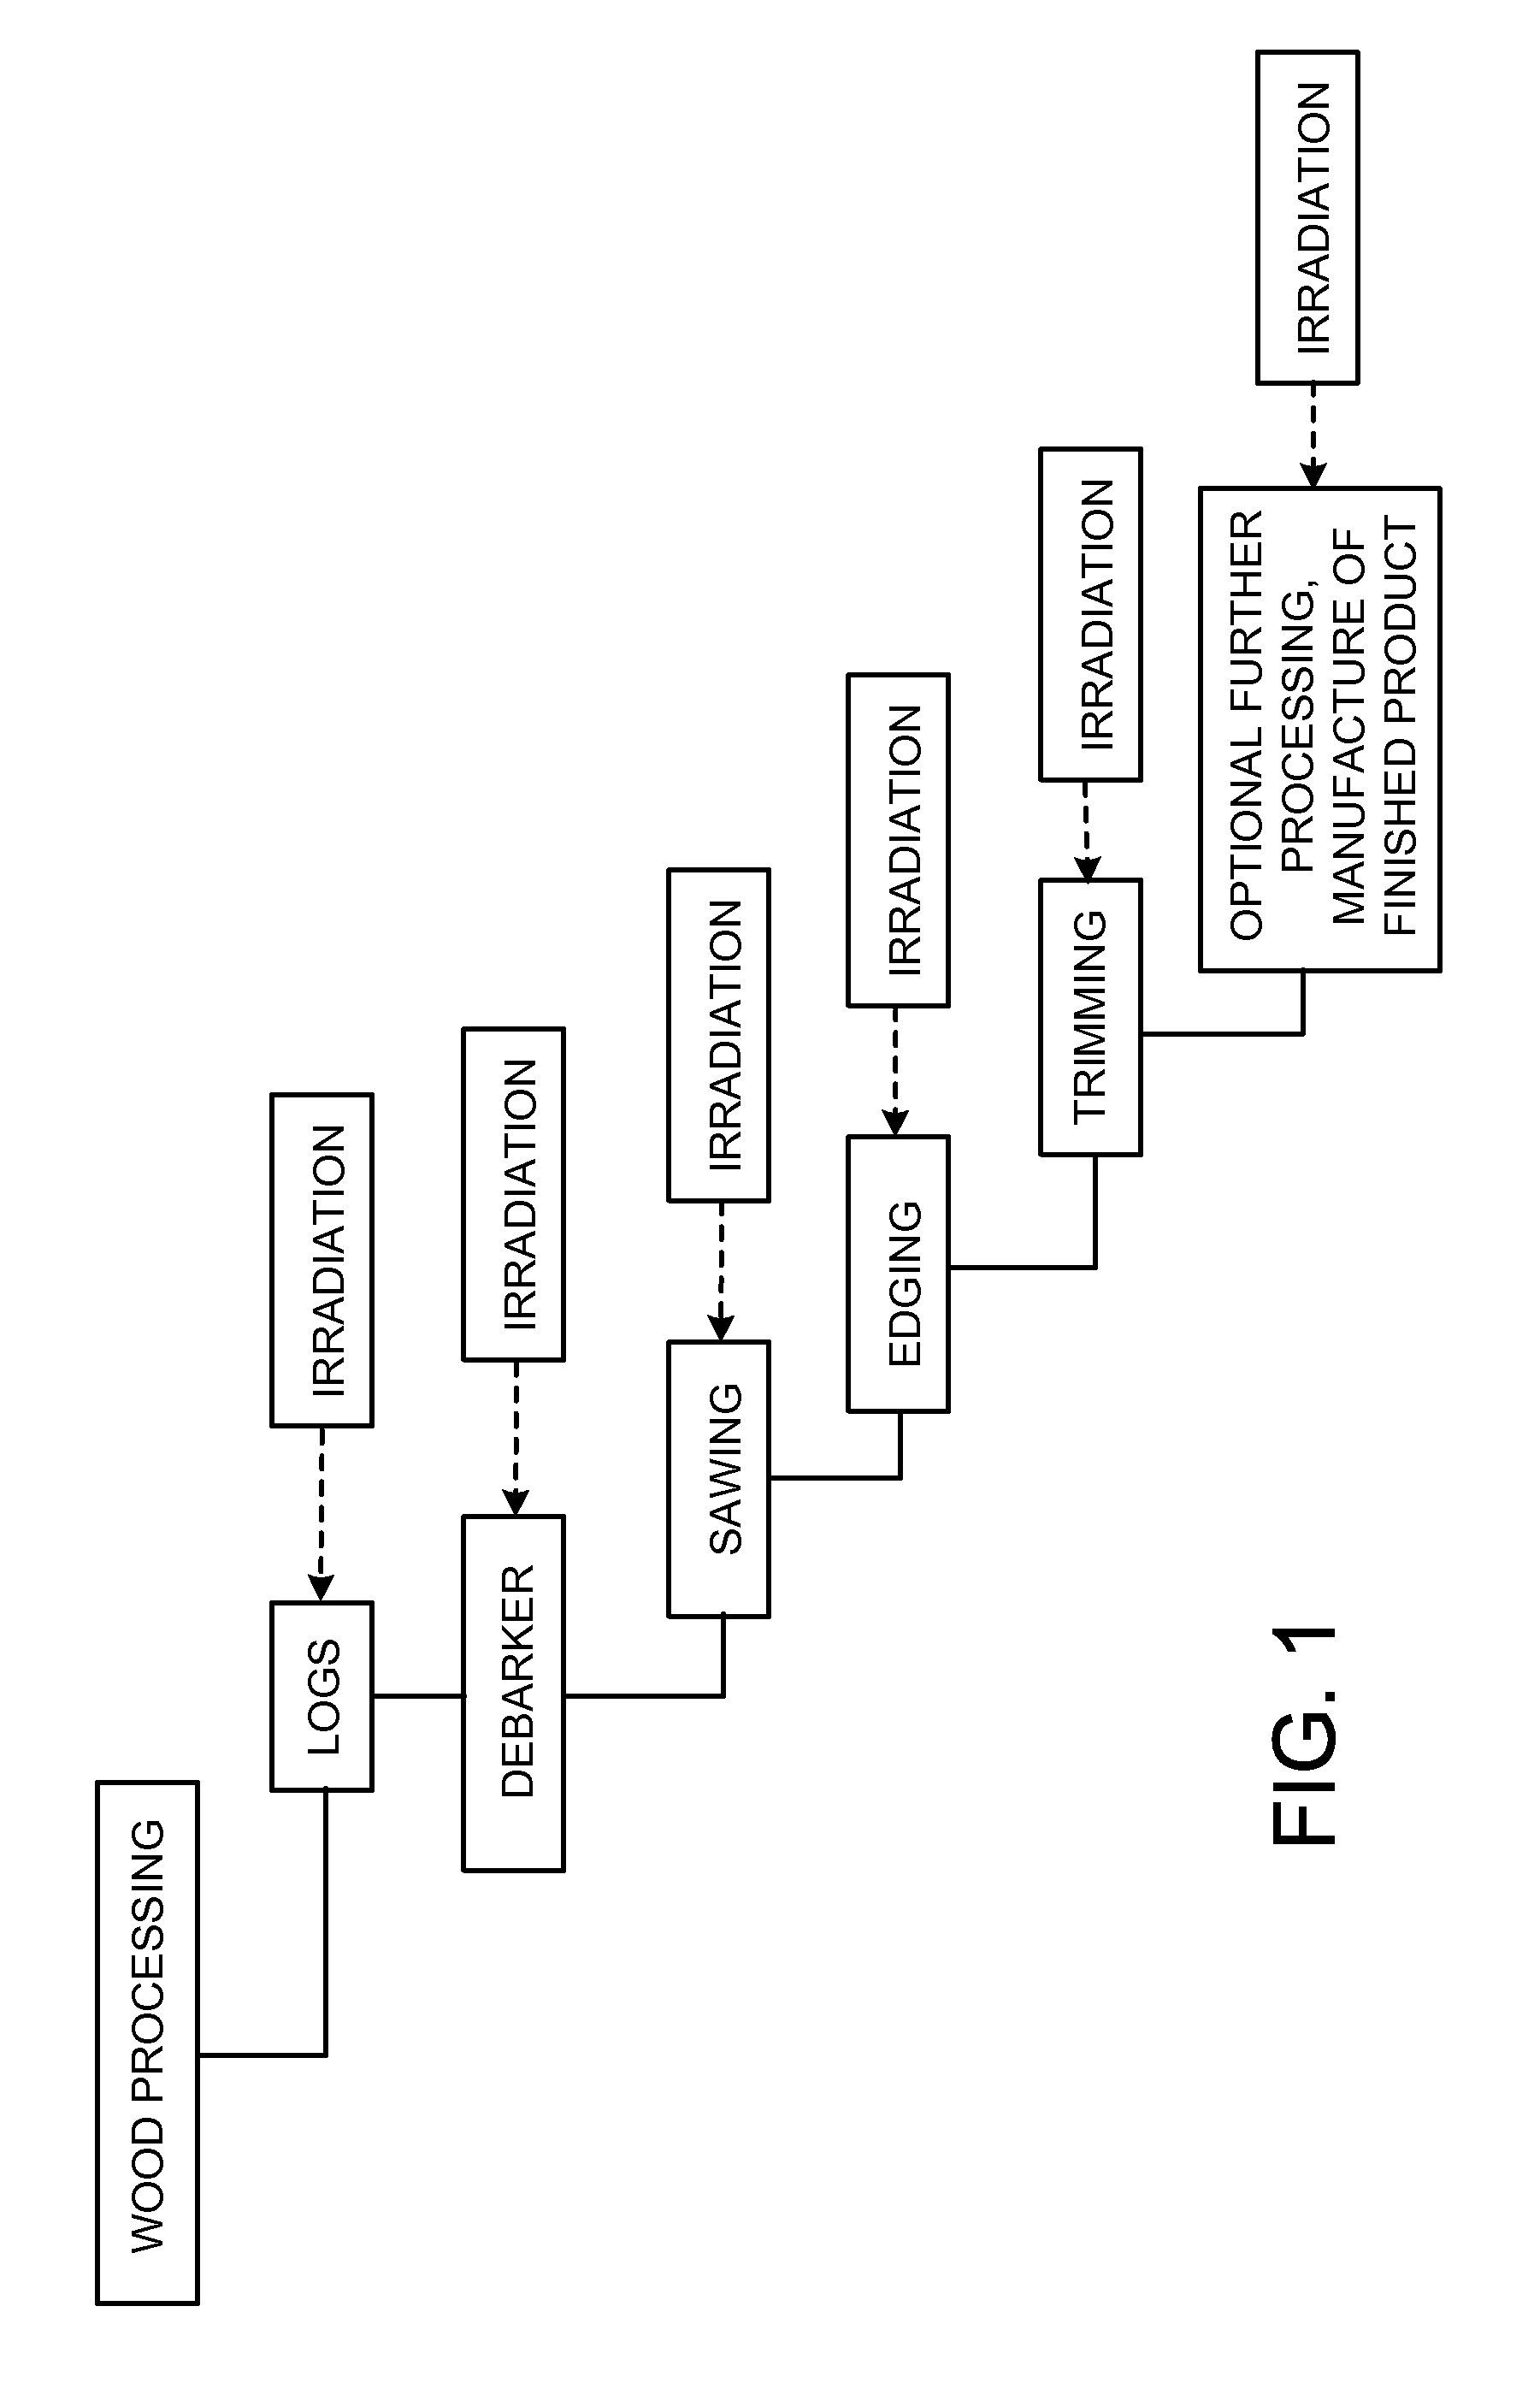 Cellulosic and lignocellulosic structural materials and methods and systems for manufacturing such materials